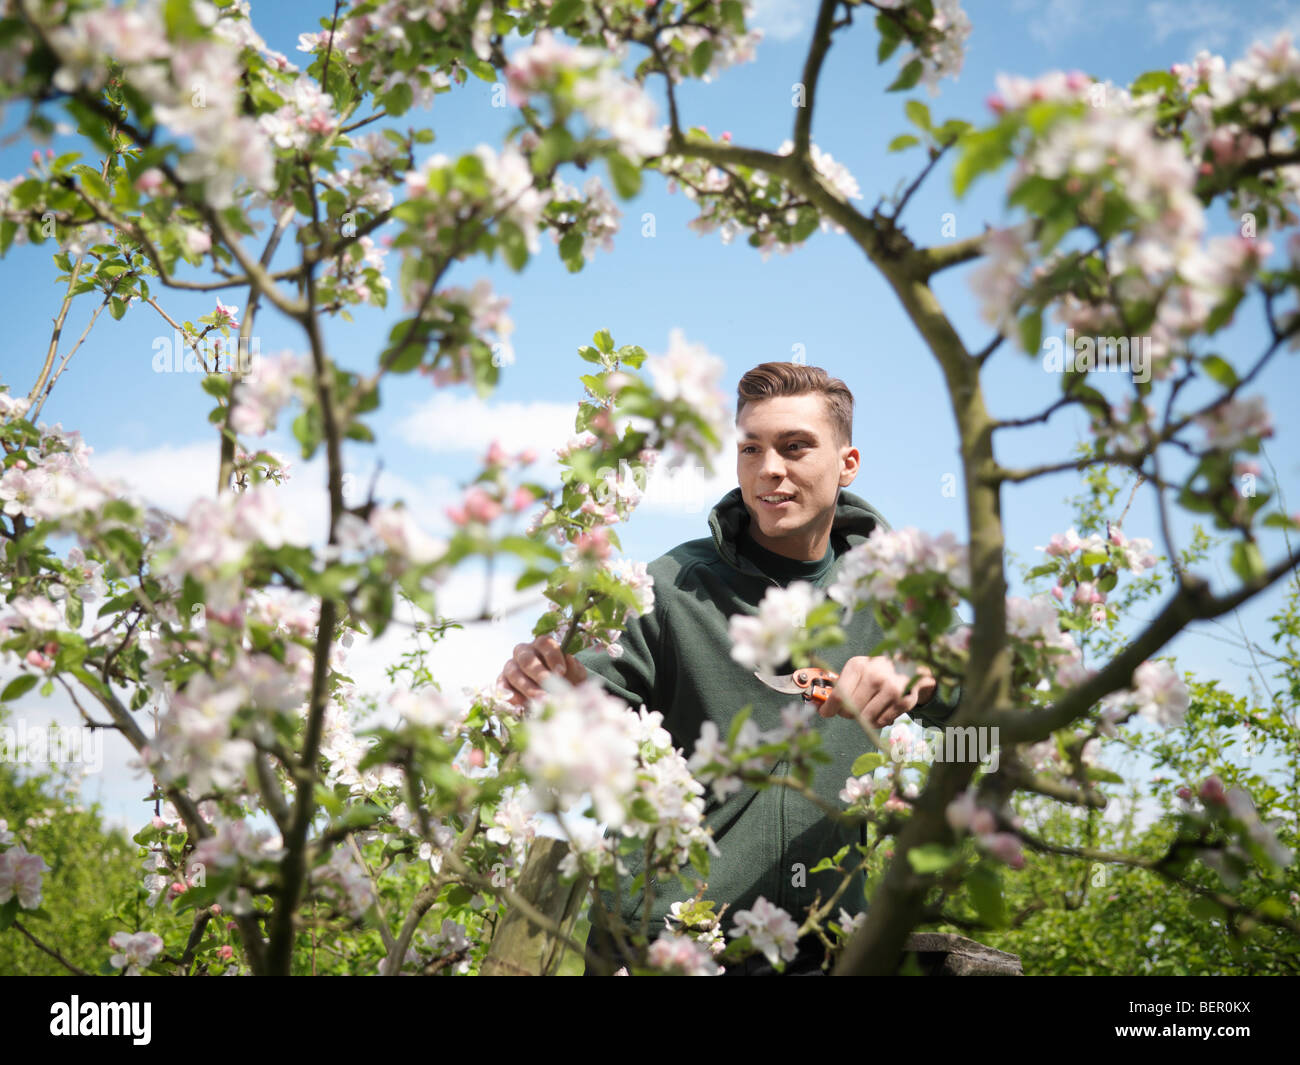 Man Cutting Apple Blossom In Orchard Stock Photo